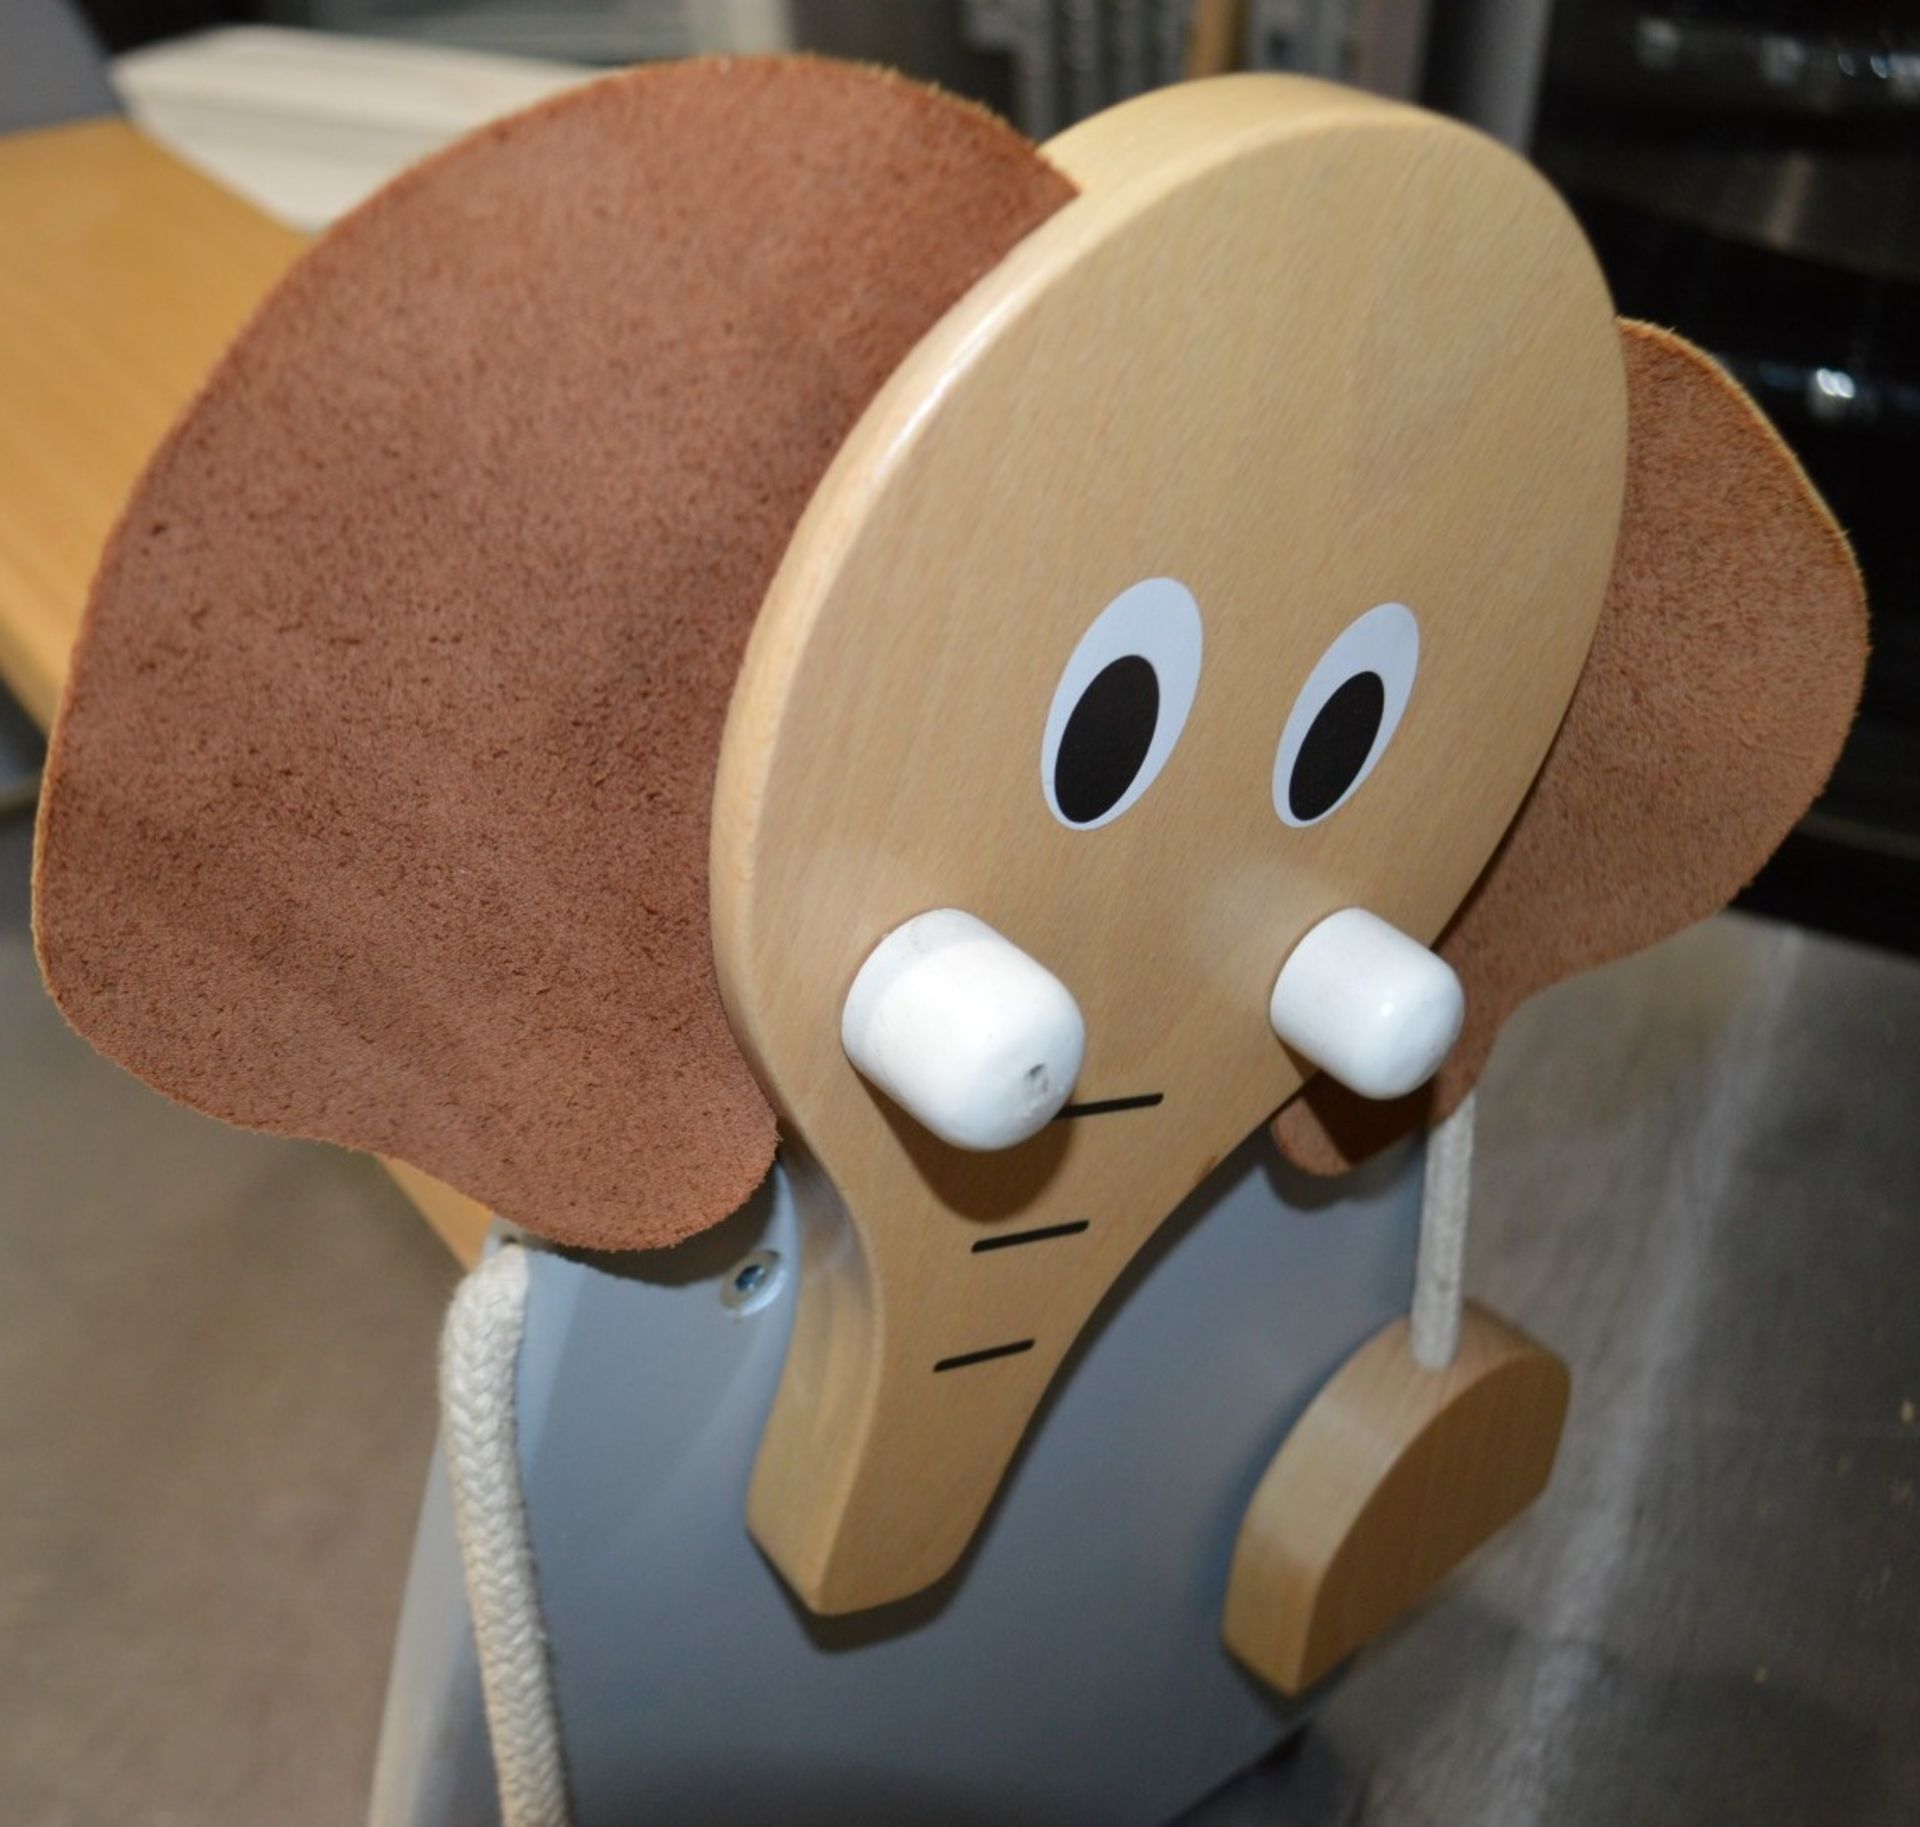 1 x Child's Solid Wood Stool / Shoe Step In The Style Of An Elephant With Real Leather Ears - A Very - Image 6 of 6